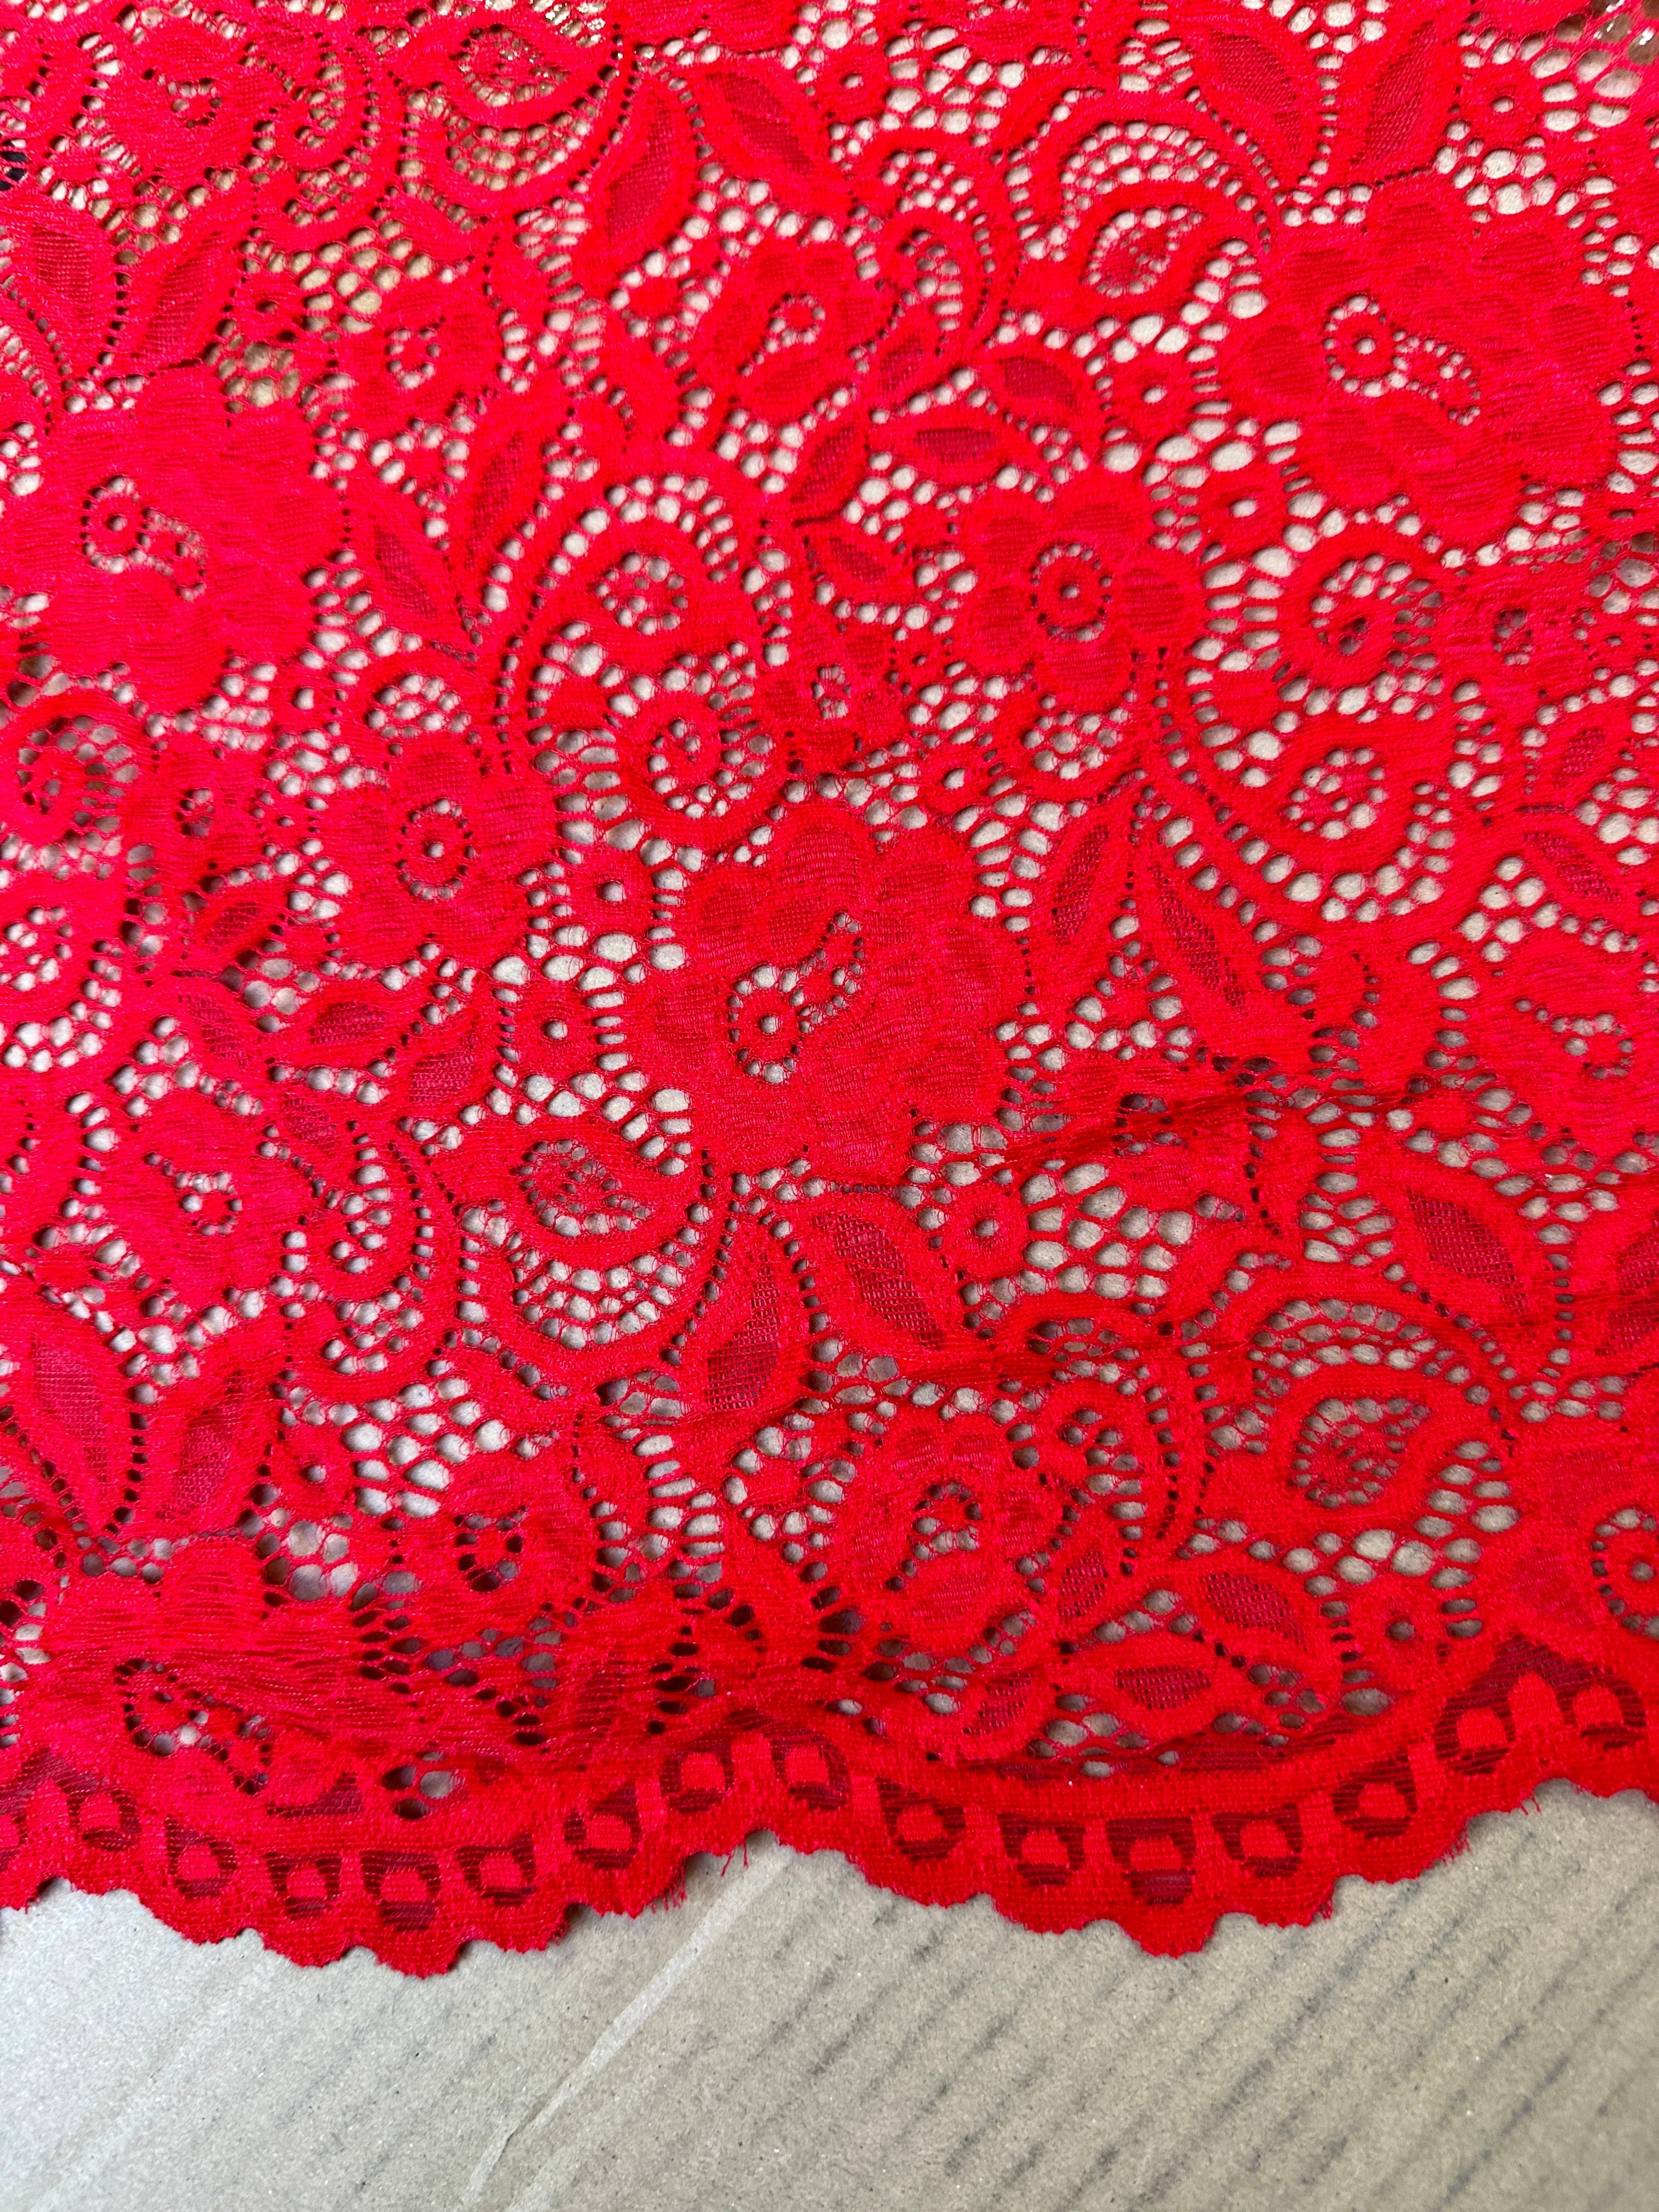 Red nylon lace, 4 way stretch lace, lace for bridal dress, red lace for woman, bridal lace design, best quality lace, buy lace online, lace for gown, lace for dress, discounted lace, best quality lace